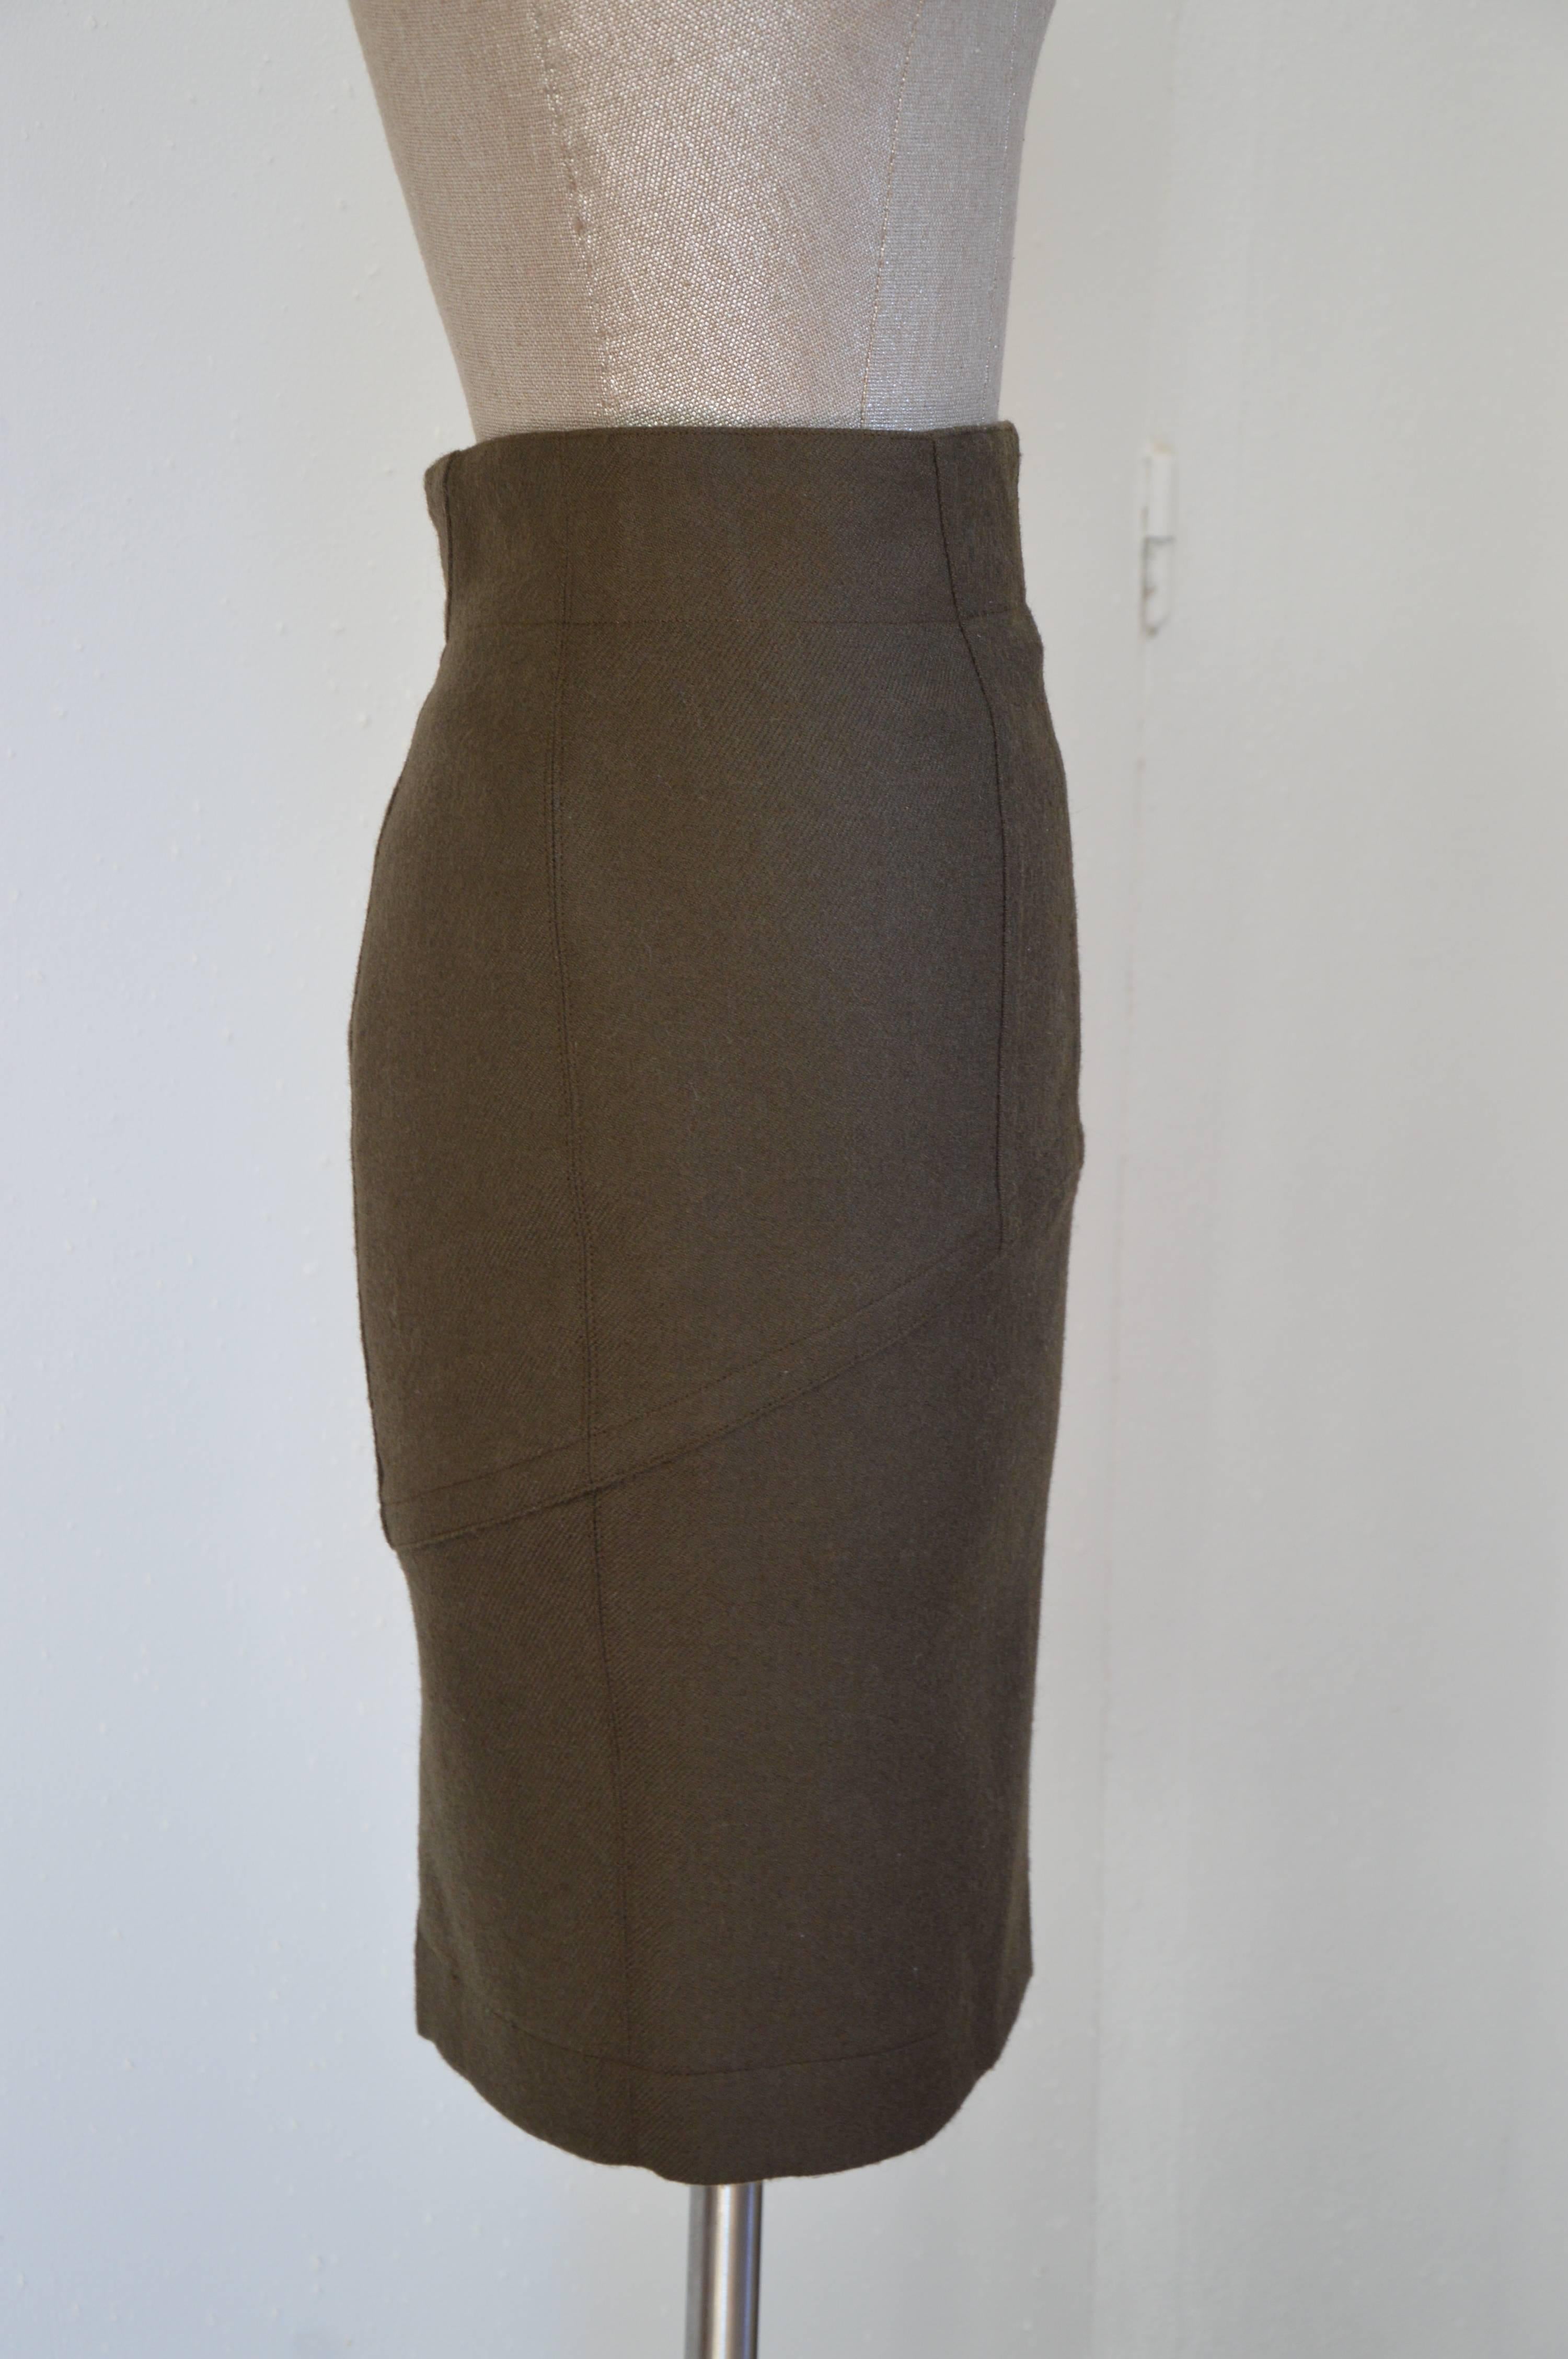 Vintage Azzedine Alaia Made in France pencil wool skirt featuring graphic stitching details
Size 36 (EU)
Size 4 (US)